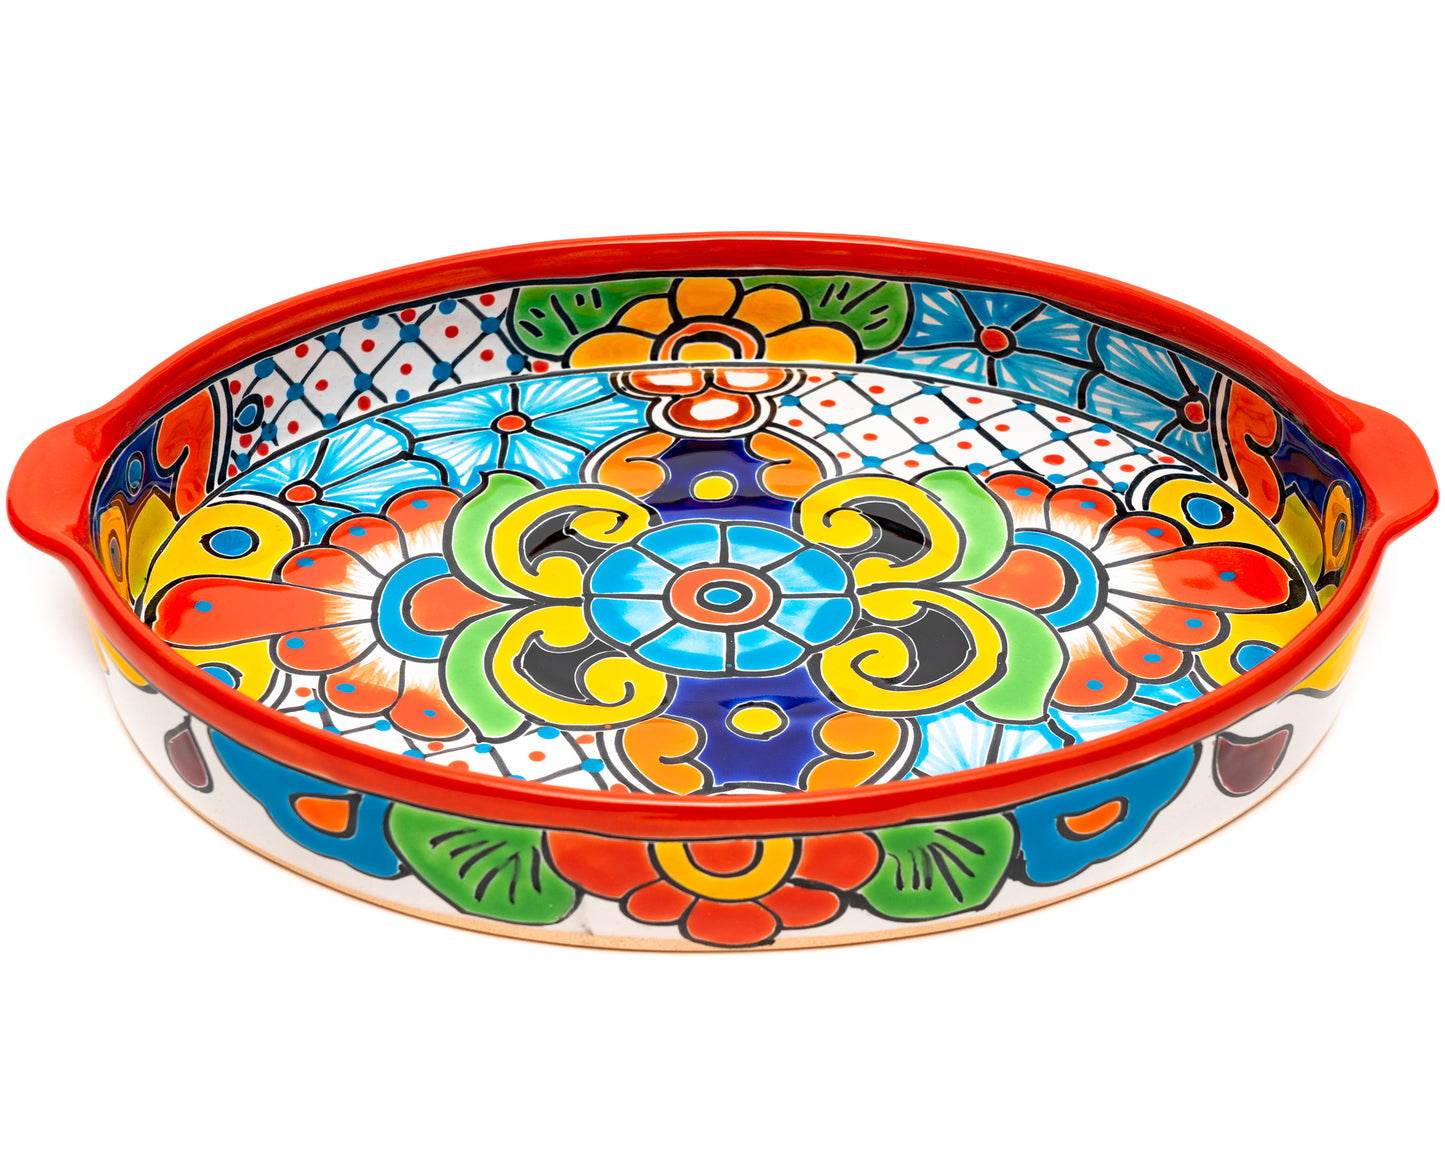 Oval Tray With Handles - Large - Red